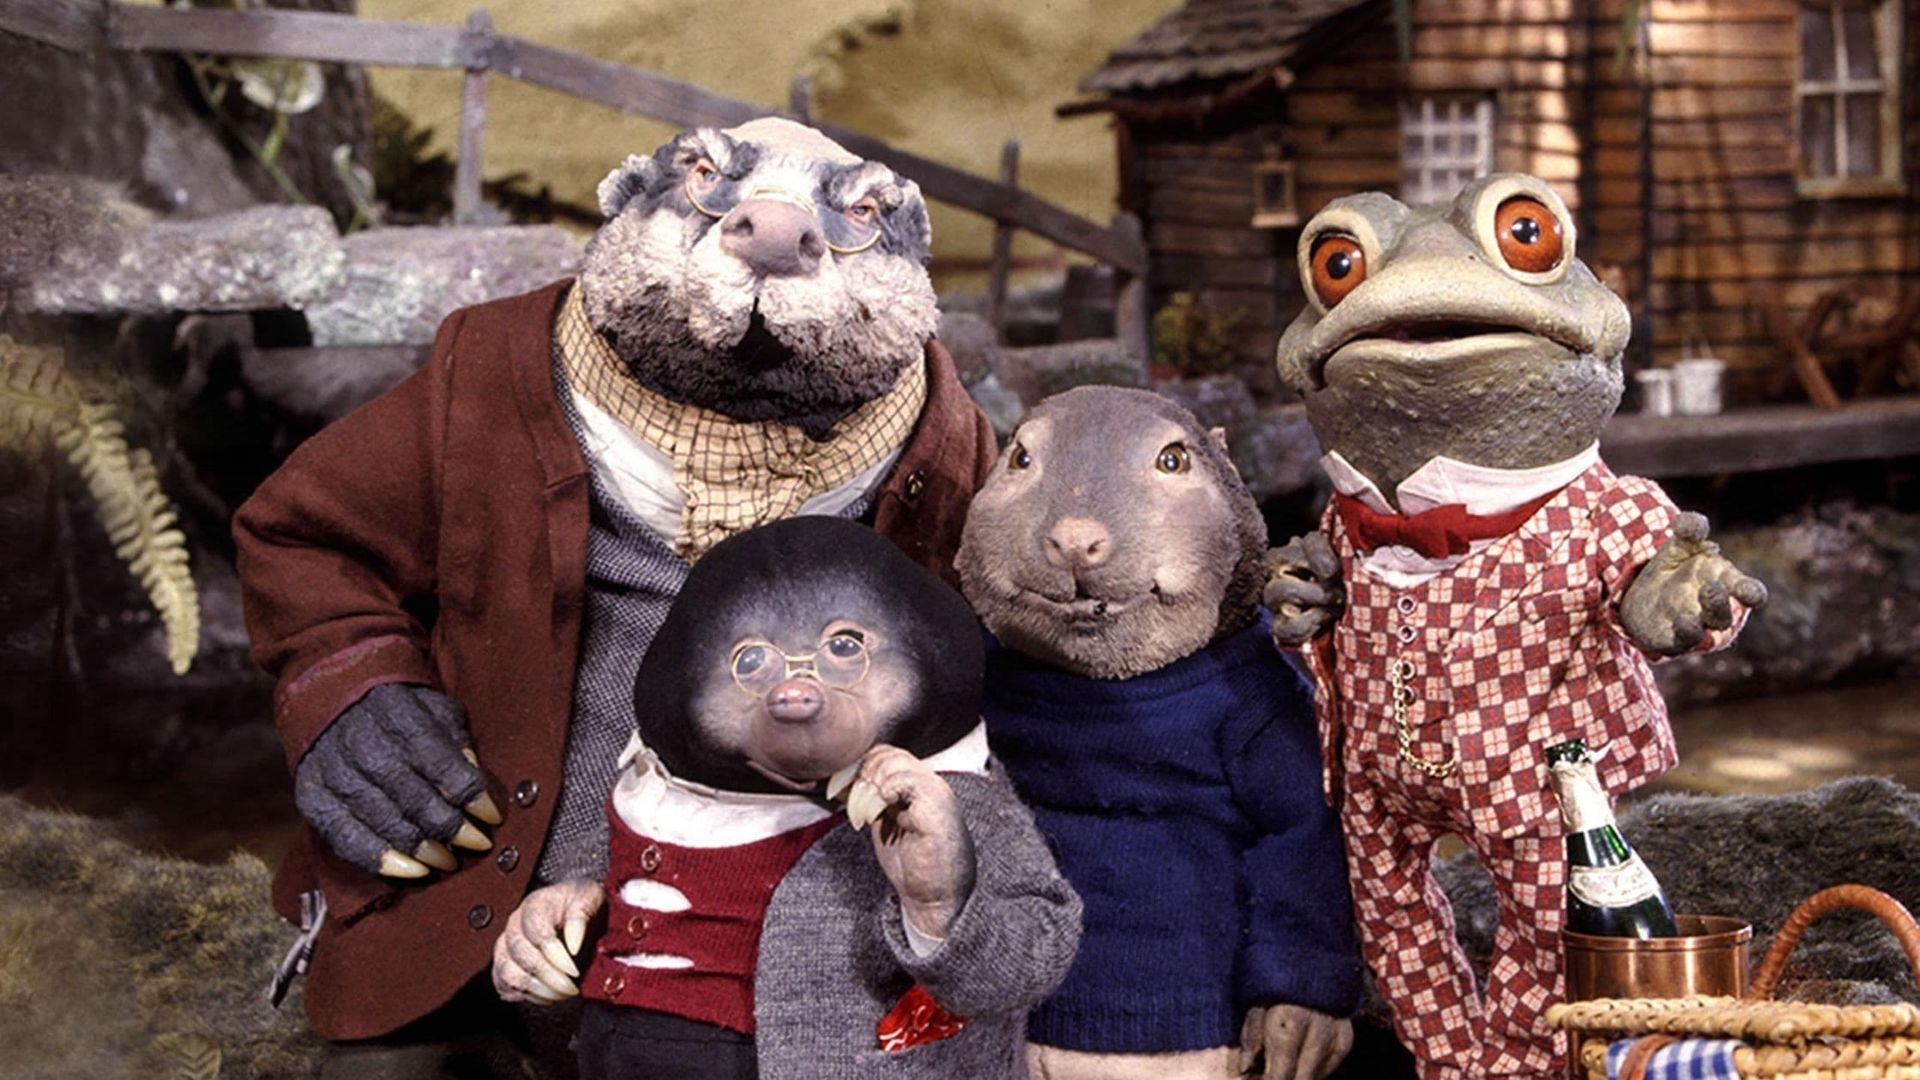 The Wind in the Willows background